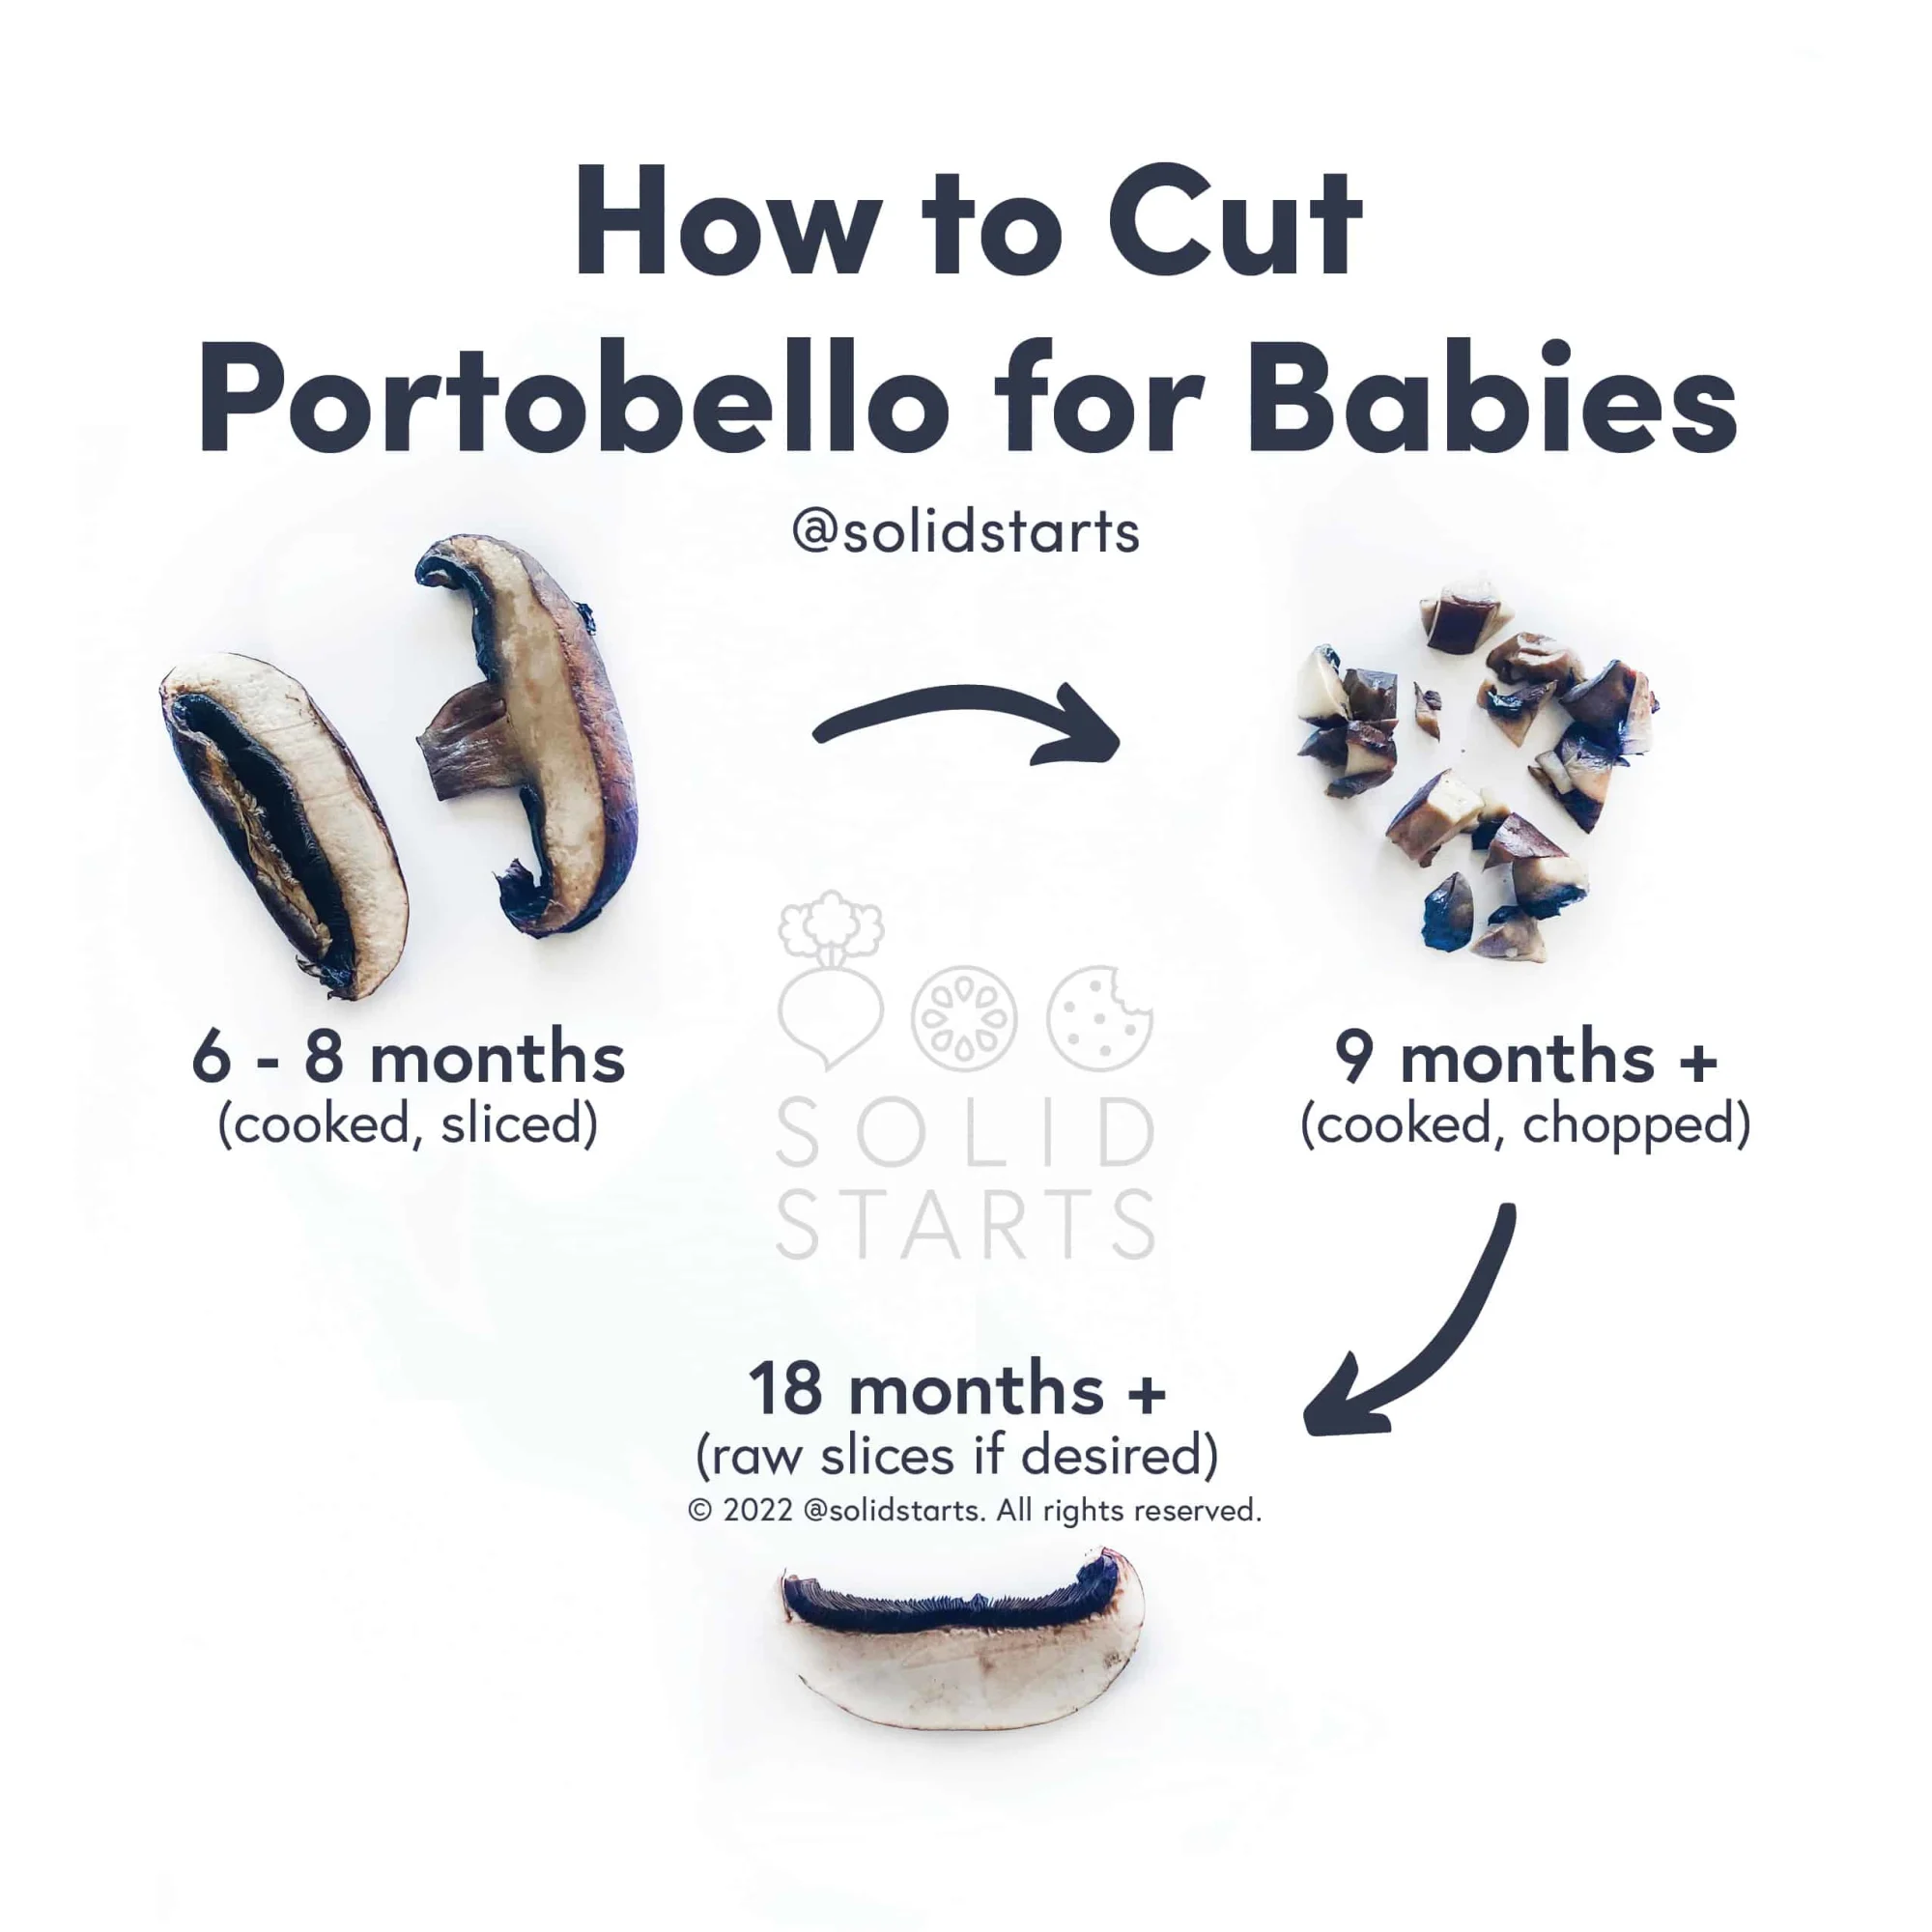 a Solid Starts infographic with the header How to Cut Portobello for Babies: cooked slices for 6 mos+, cooked bite size pieces for 9 mos+, raw slices if desired for 18 mos+